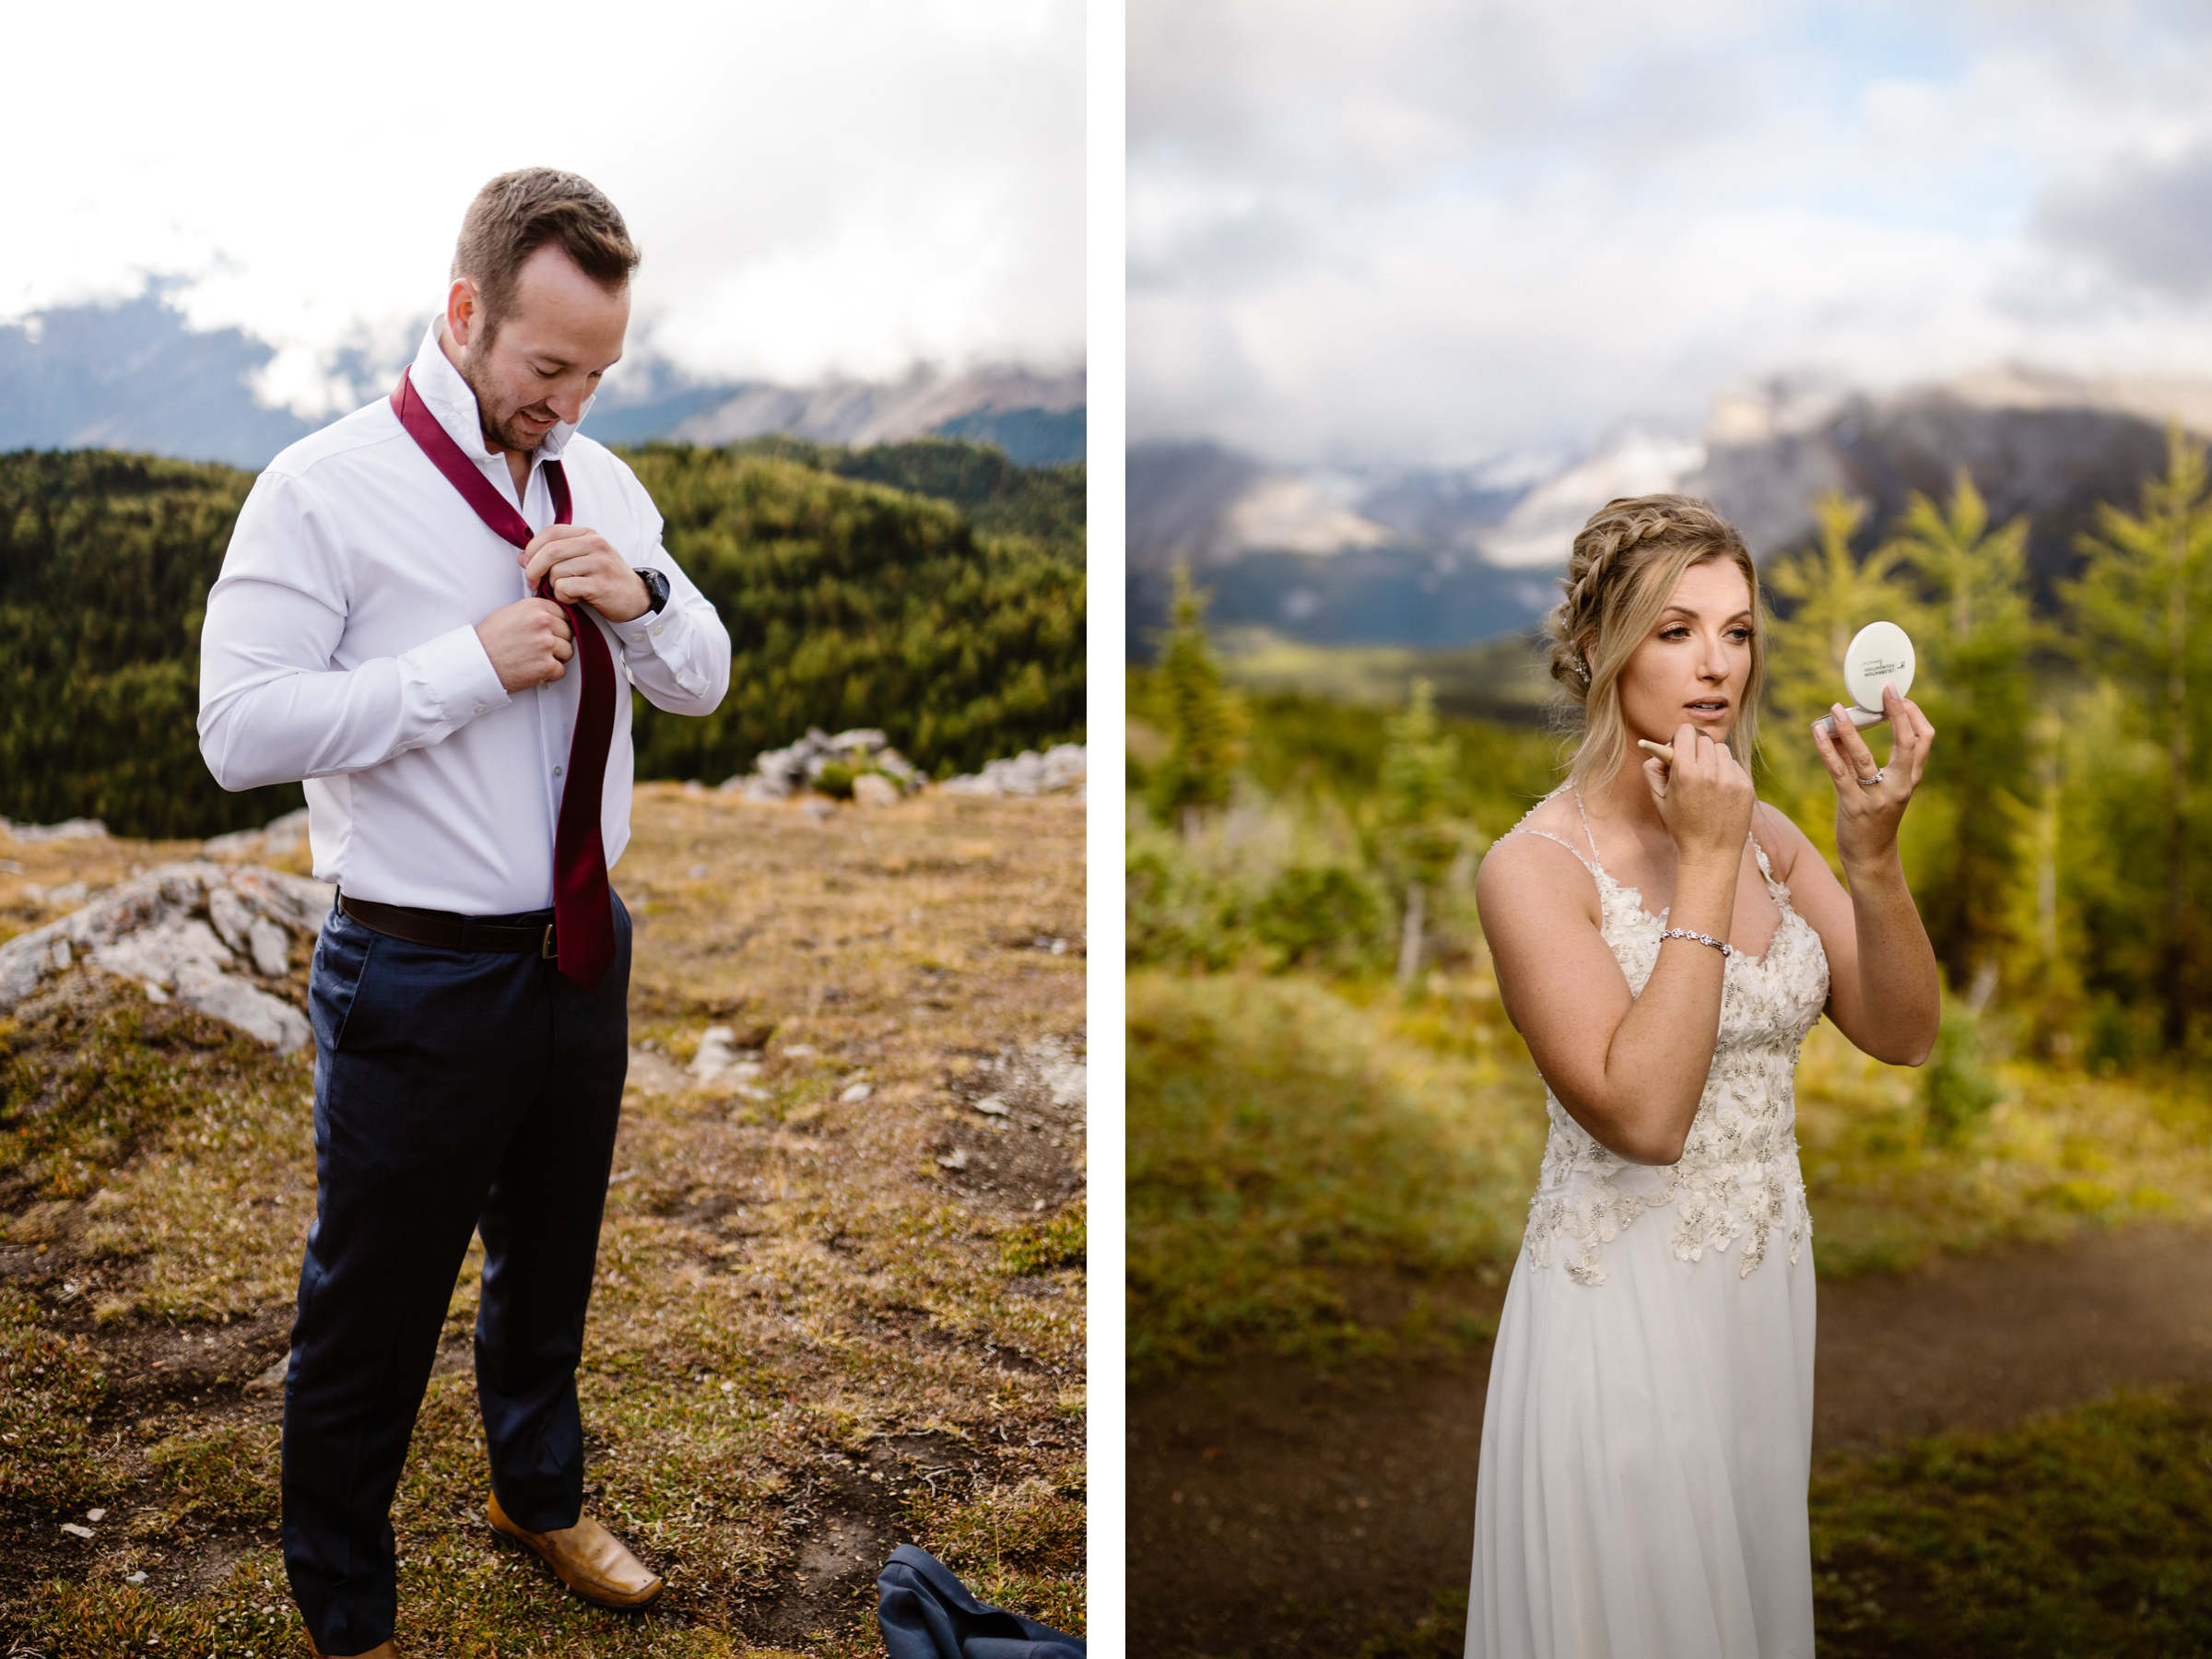 Mount Assiniboine Elopement Photographers at a Backcountry Lodge - Photo 21